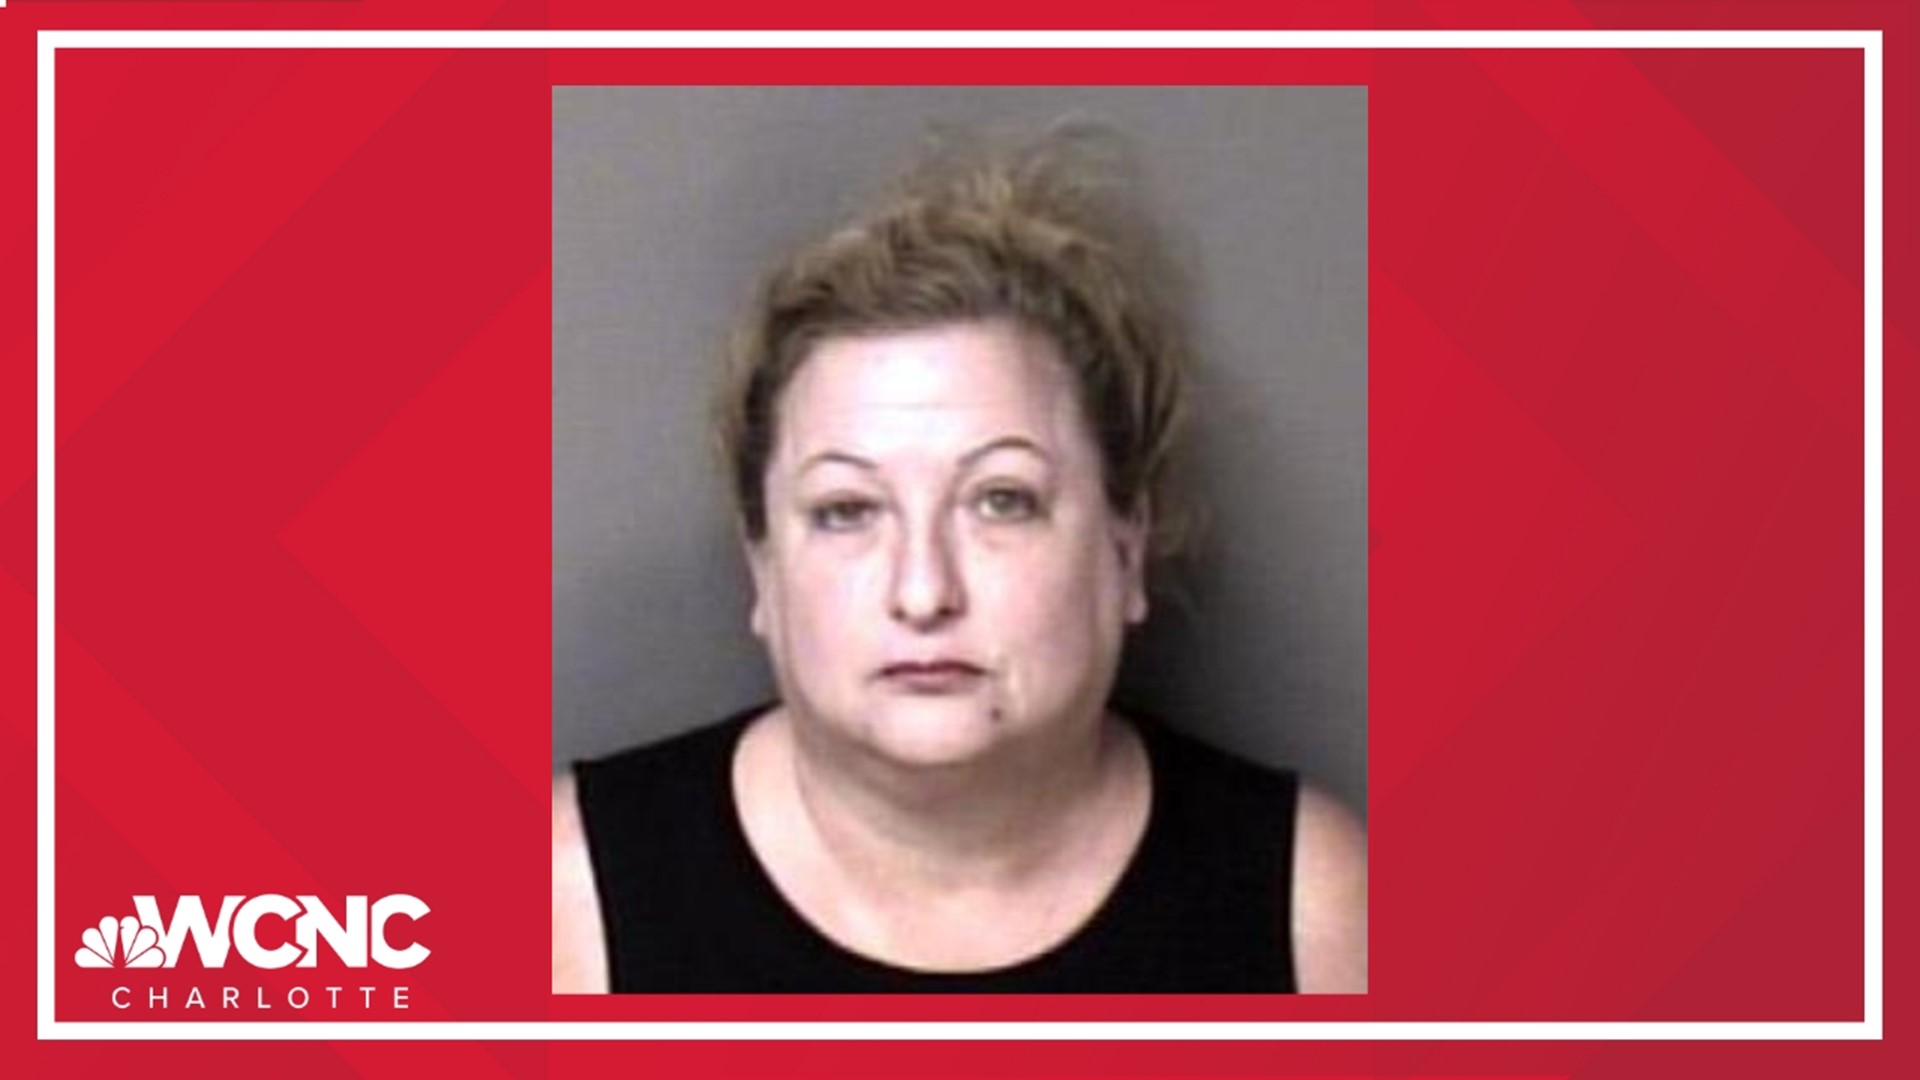 Anita McCall has been arrested and charged with DWI in Gaston County